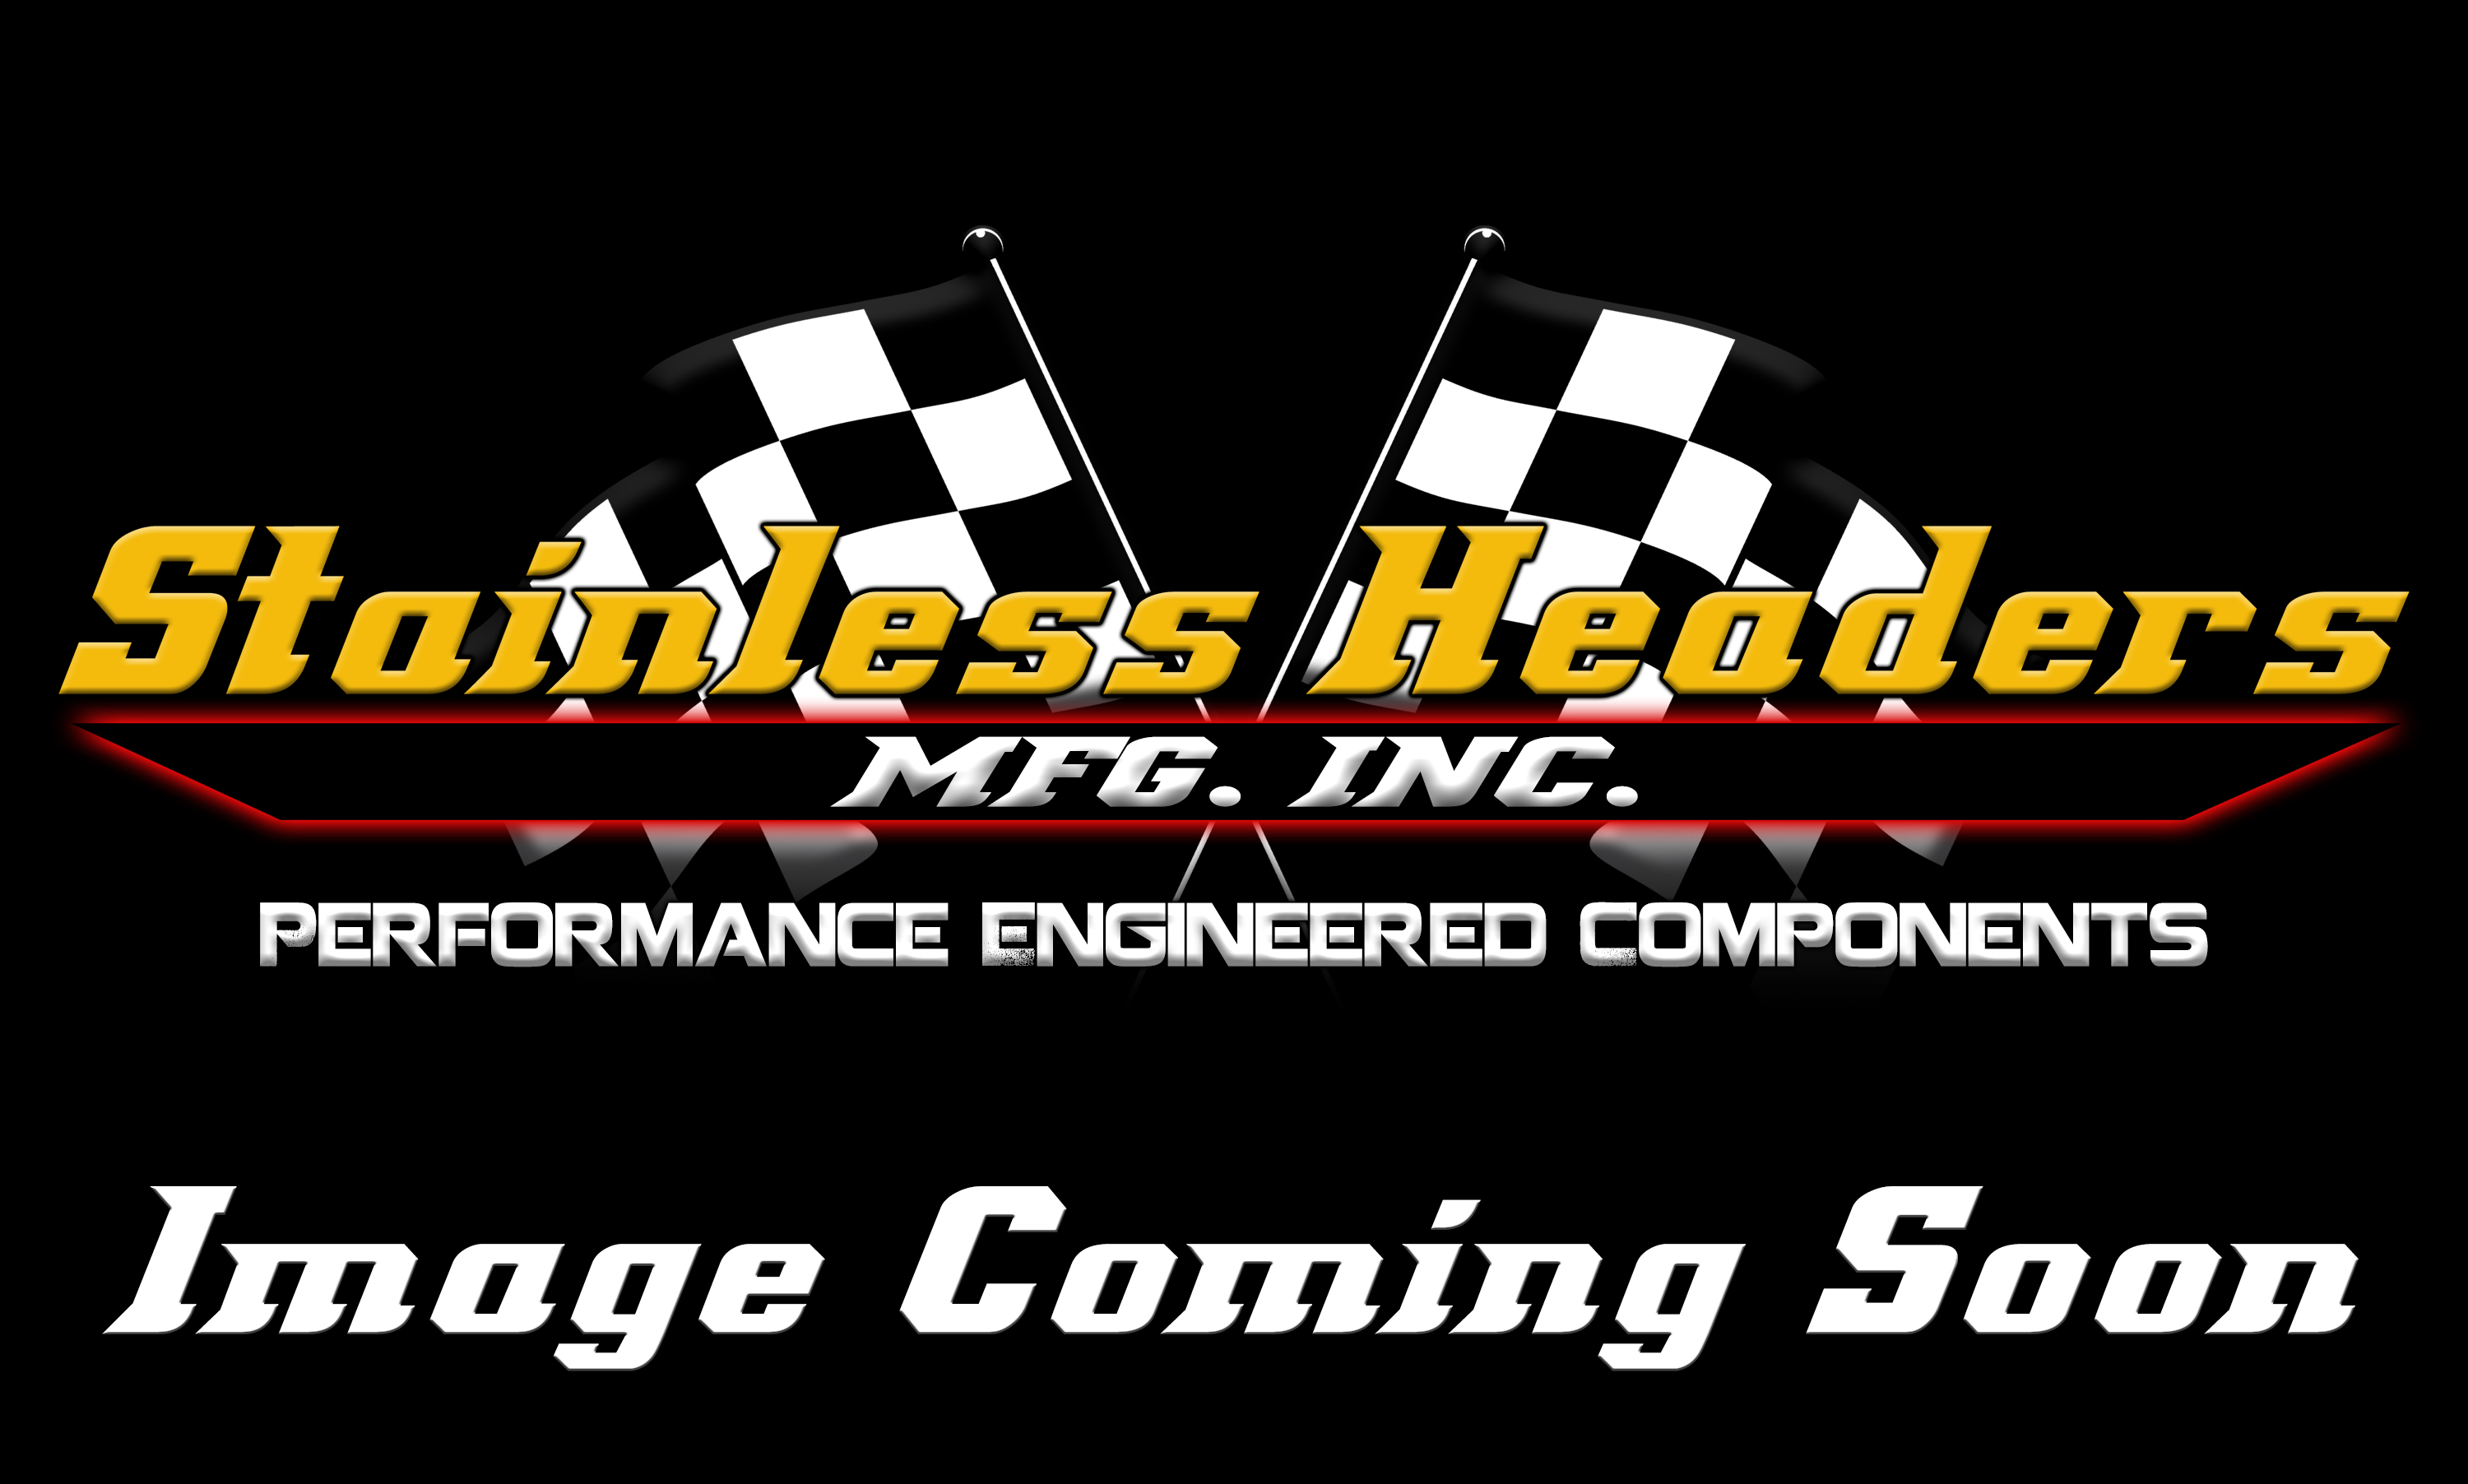 Custom Header Components - Merge Collectors - Stainless Headers - 1 7/8" Primary 3 into 1 Performance Merge Collector-16ga Mild Steel